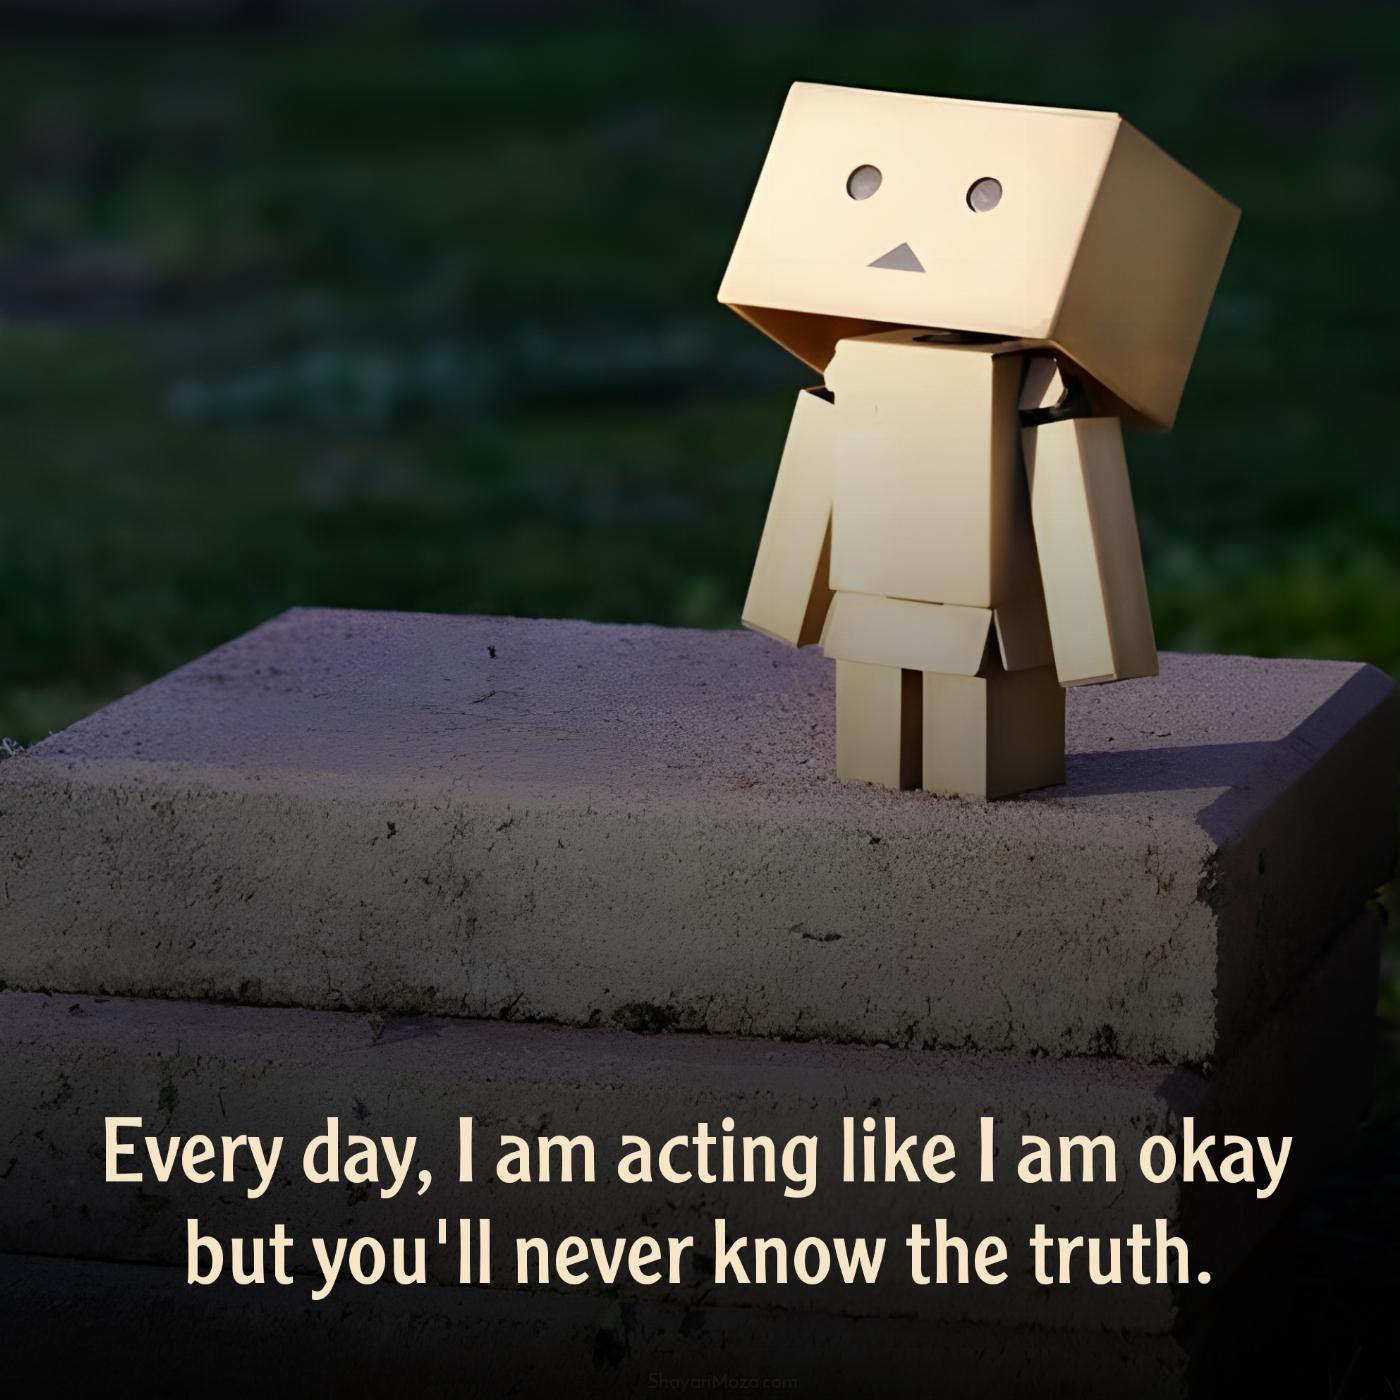 Every day I am acting like I am okay but you'll never know the truth